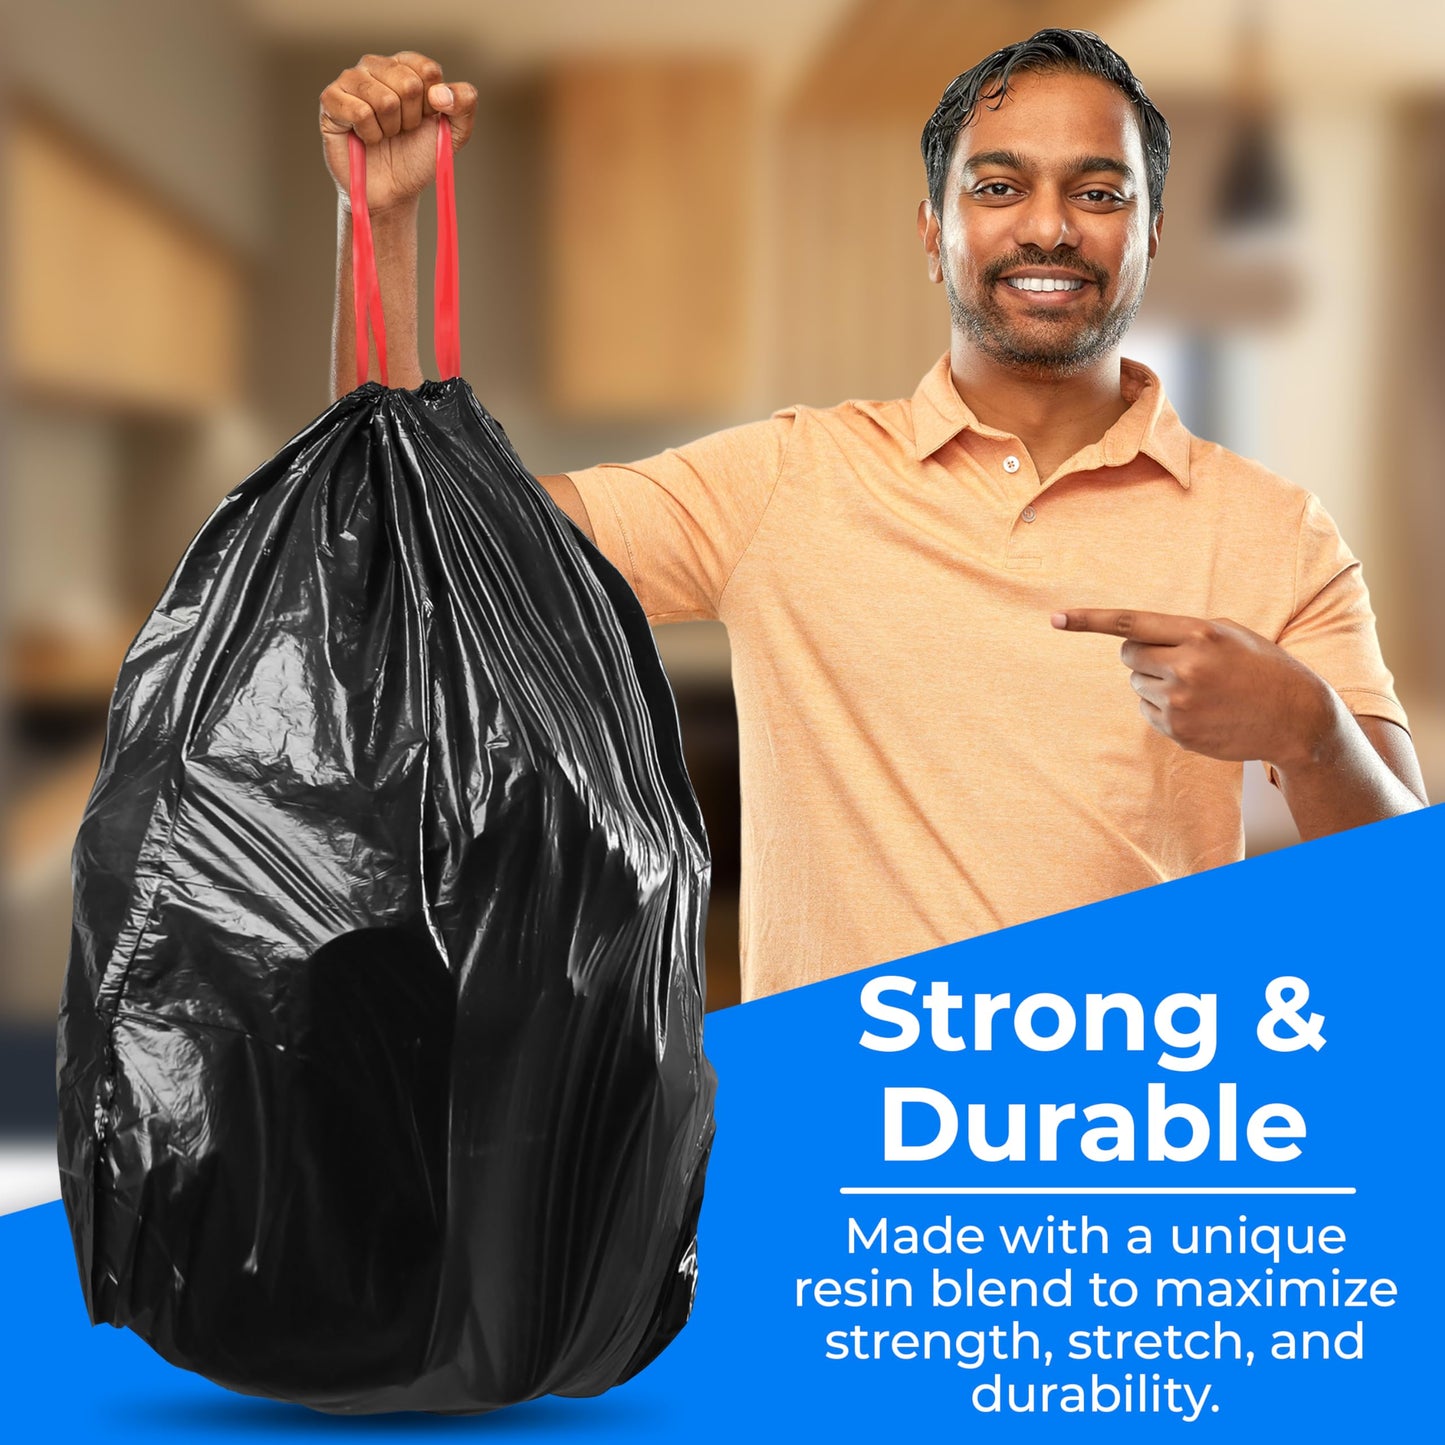 ToughBag 30 Gallon Trash Bags Drawstring (150 Count) Large Black Garbage Bags 30+ Gallon, Heavy Duty 30 Gallon Trash Bags for Kitchen, Commercial & Lawn